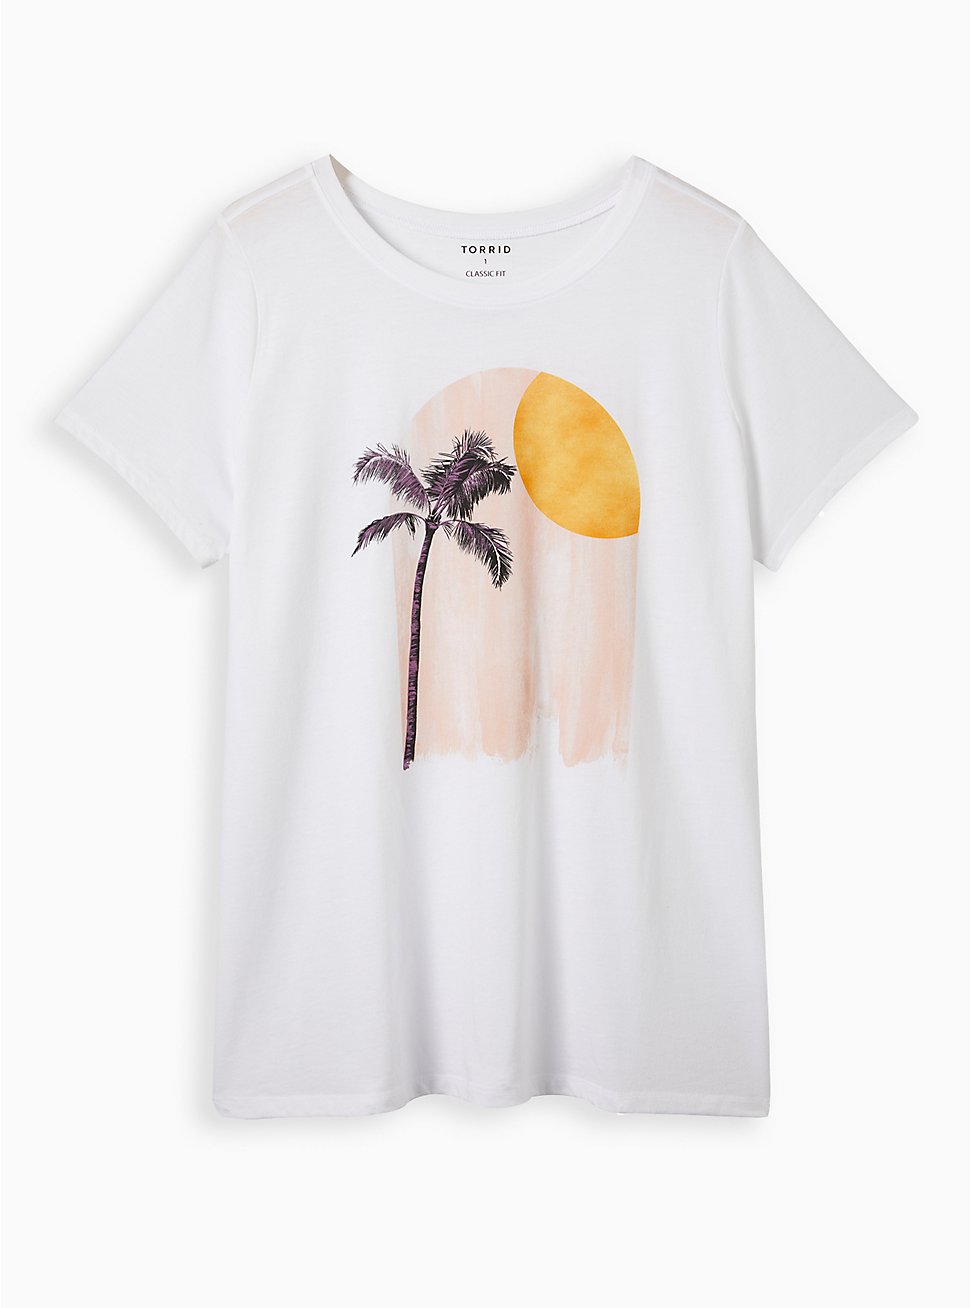 Plus Size Everyday Tee - Signature Jersey Palm Tree White, BRIGHT WHITE, hi-res